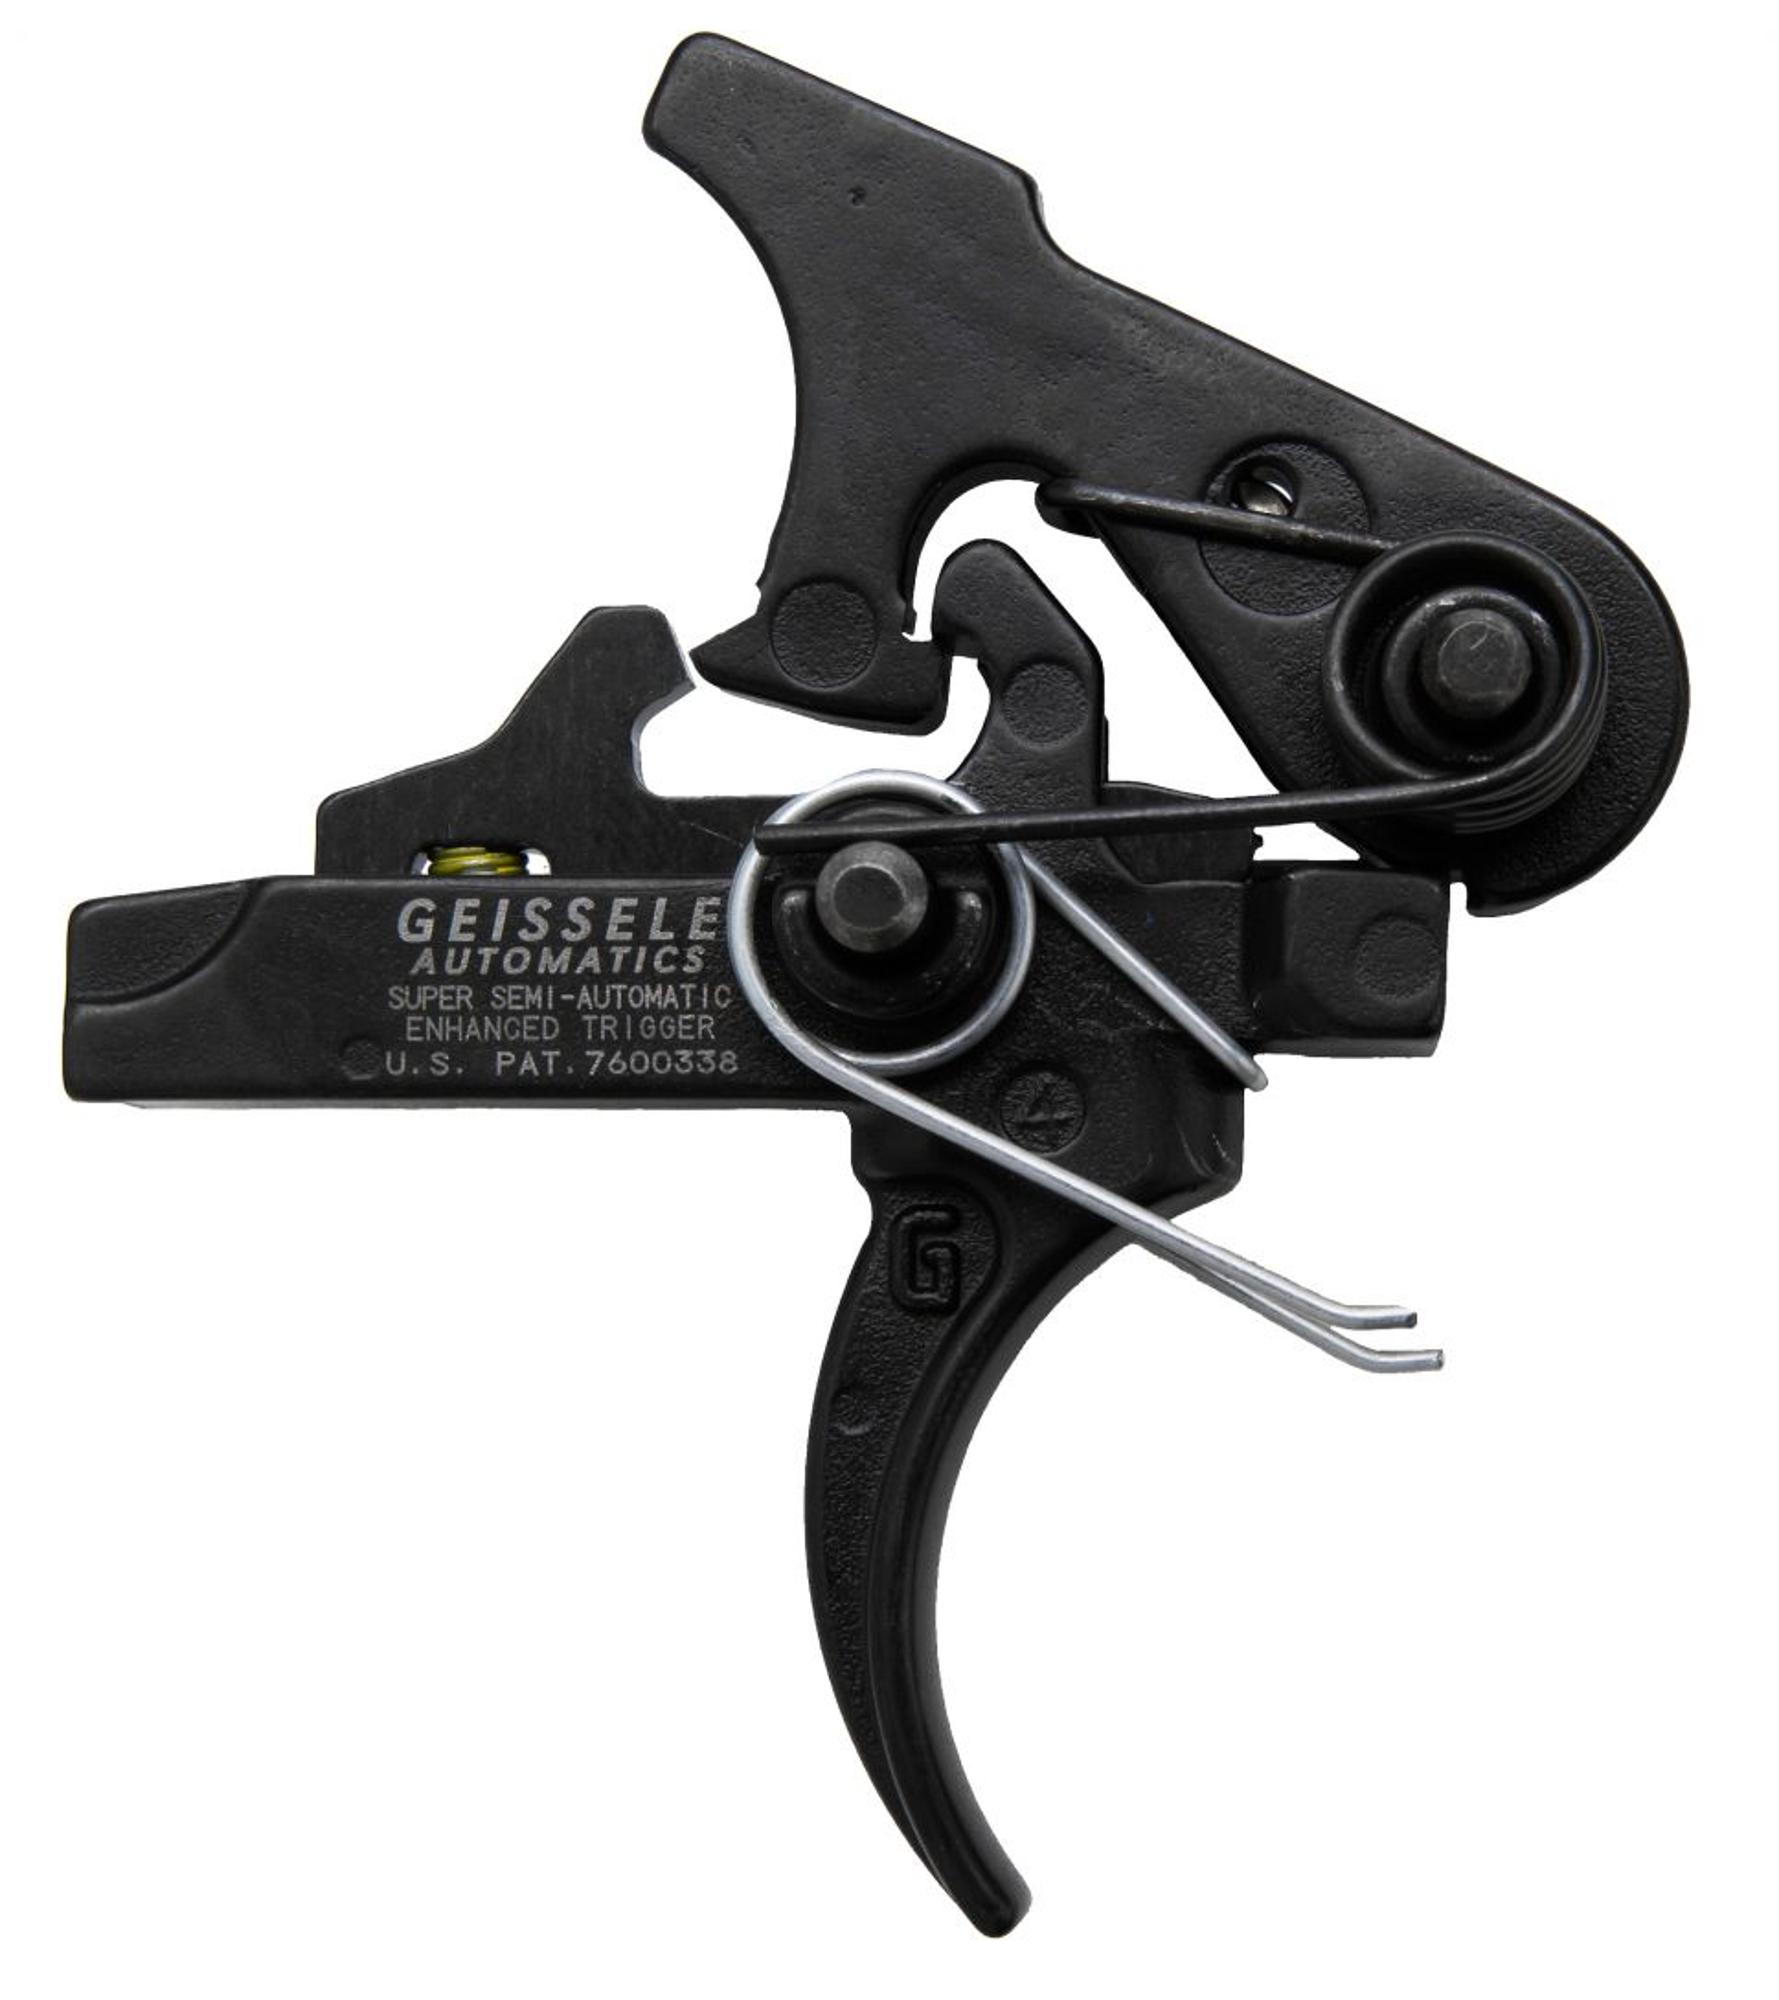 Ssa-e 2-stage Curved Trigger